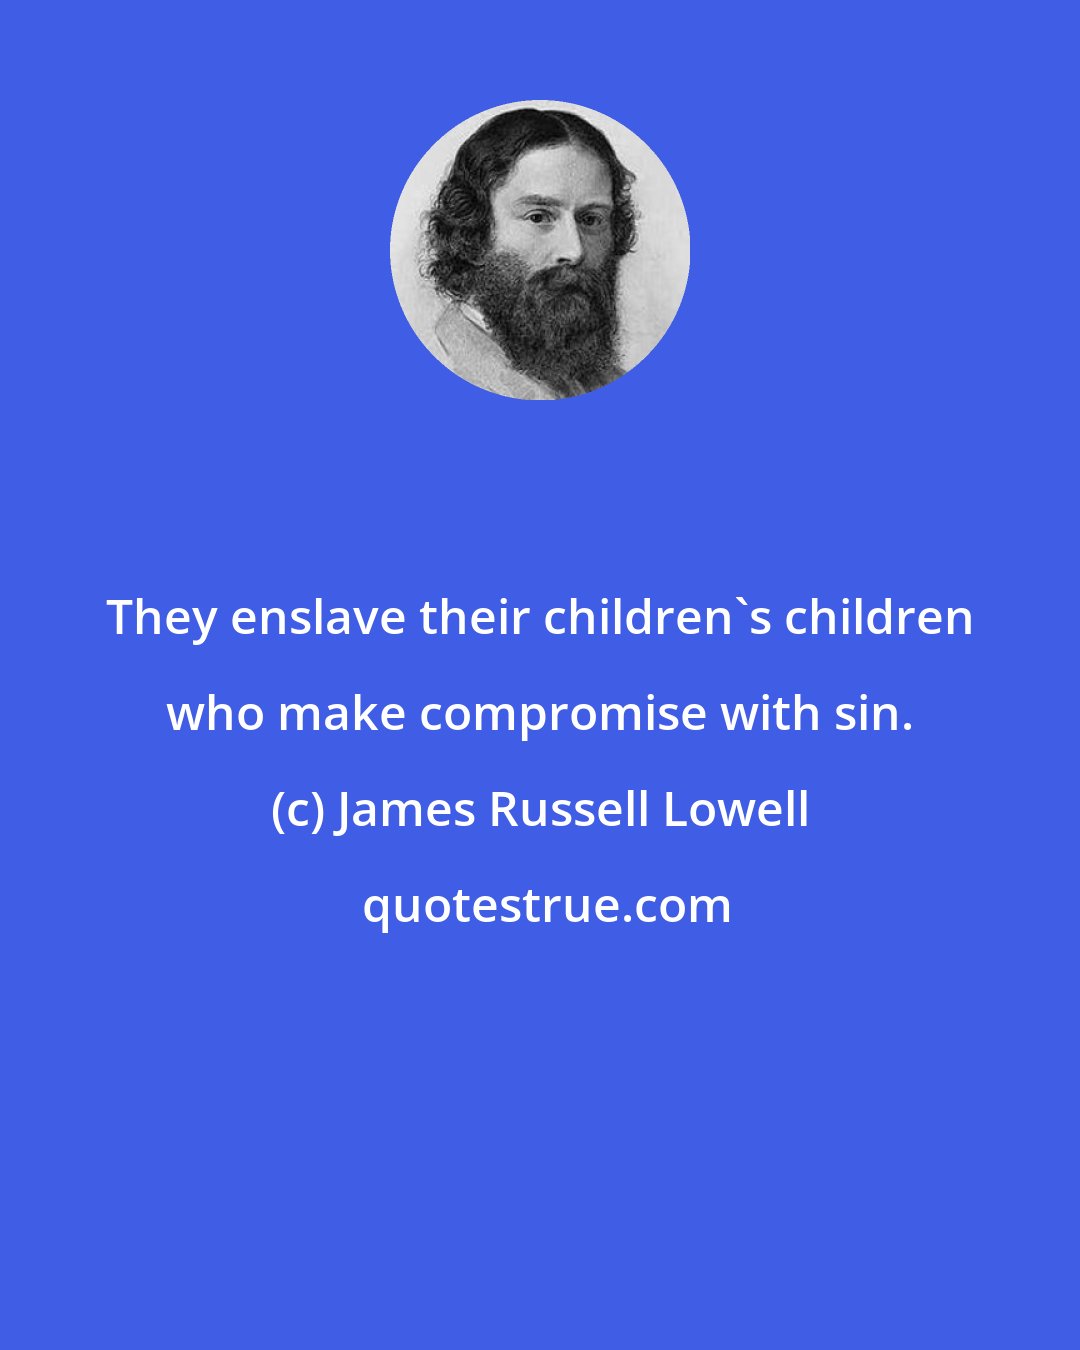 James Russell Lowell: They enslave their children's children who make compromise with sin.